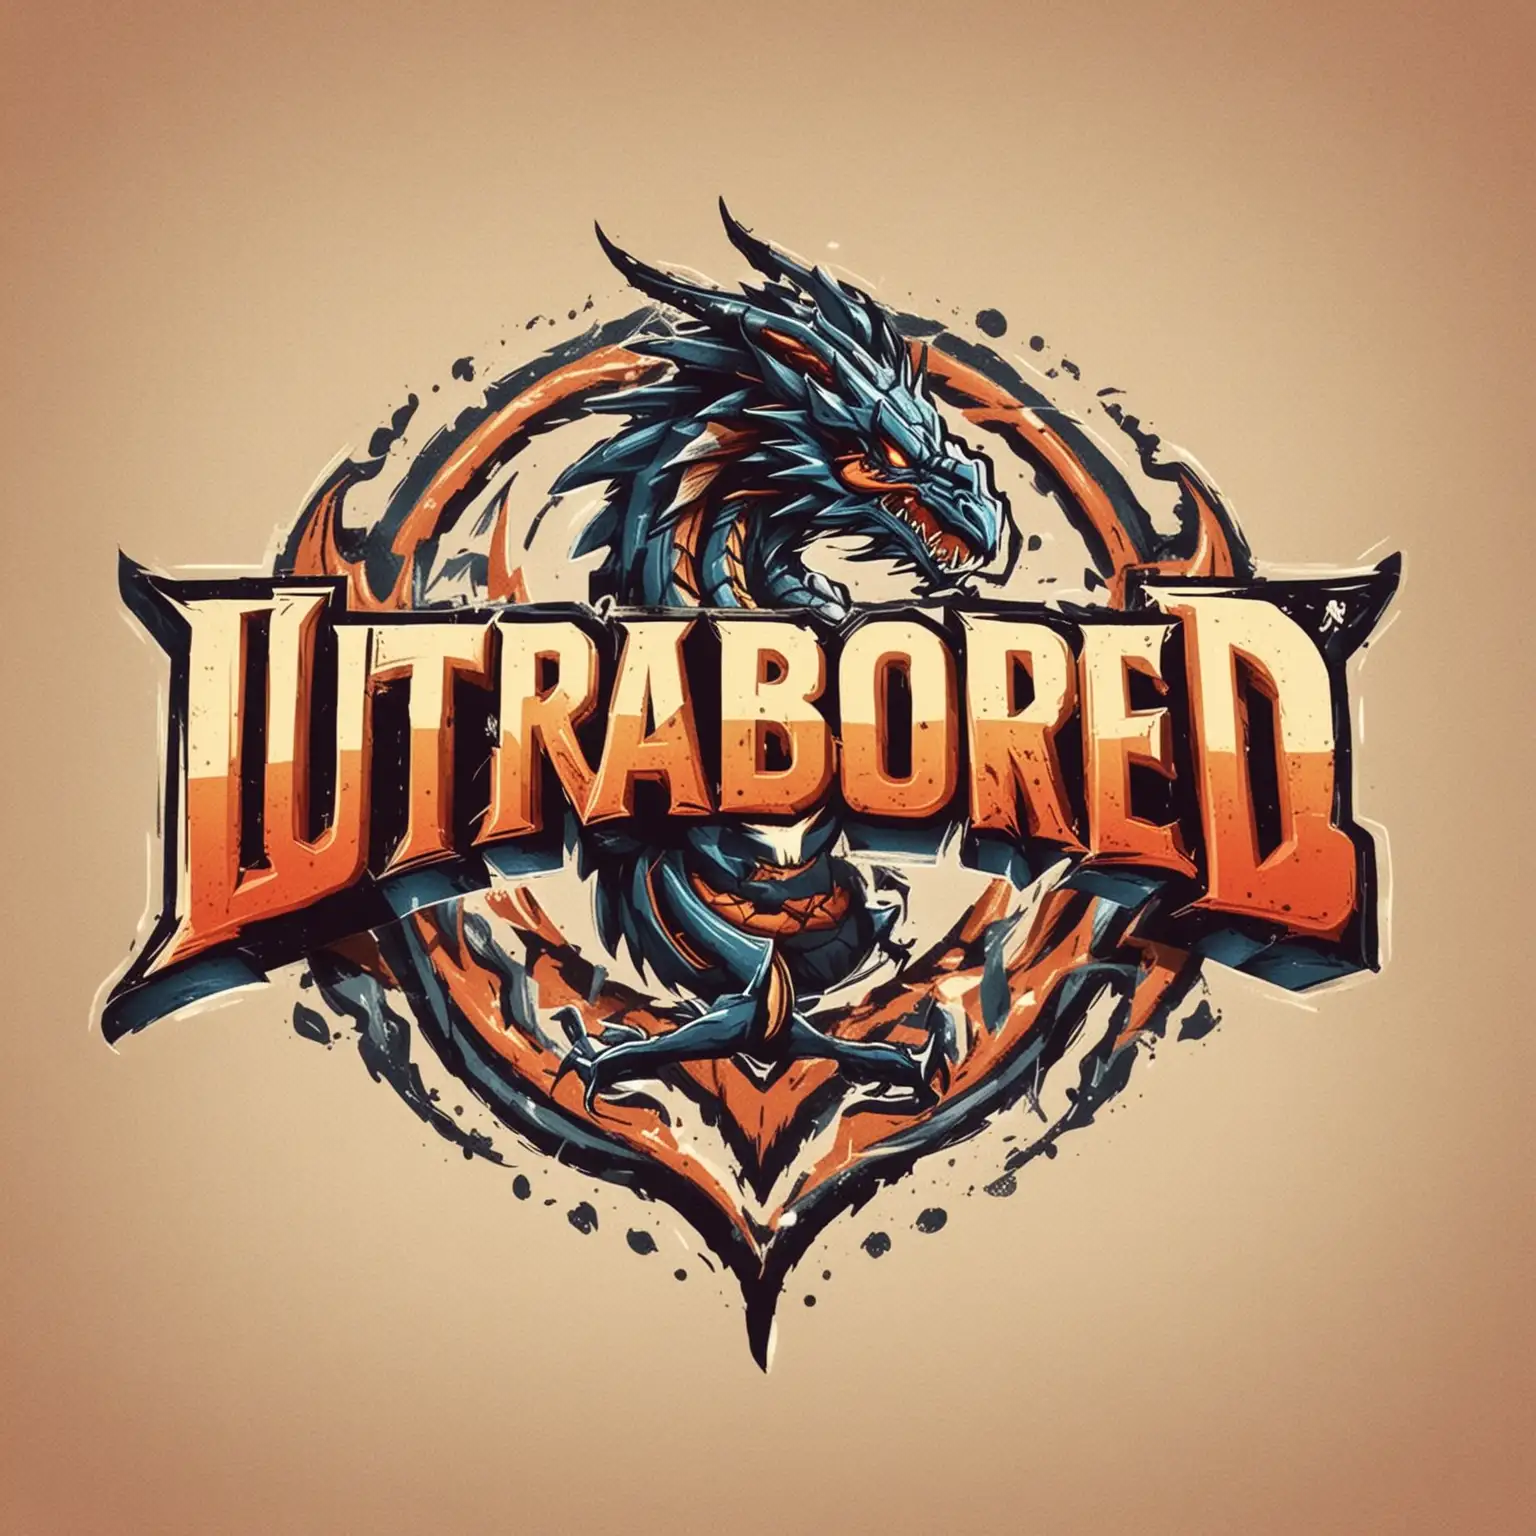 retro style logo, the logo of a company named "UltraBored" , use the lightning dragon theme for the logo, make sure the word "ultrabored" is very easy to read.